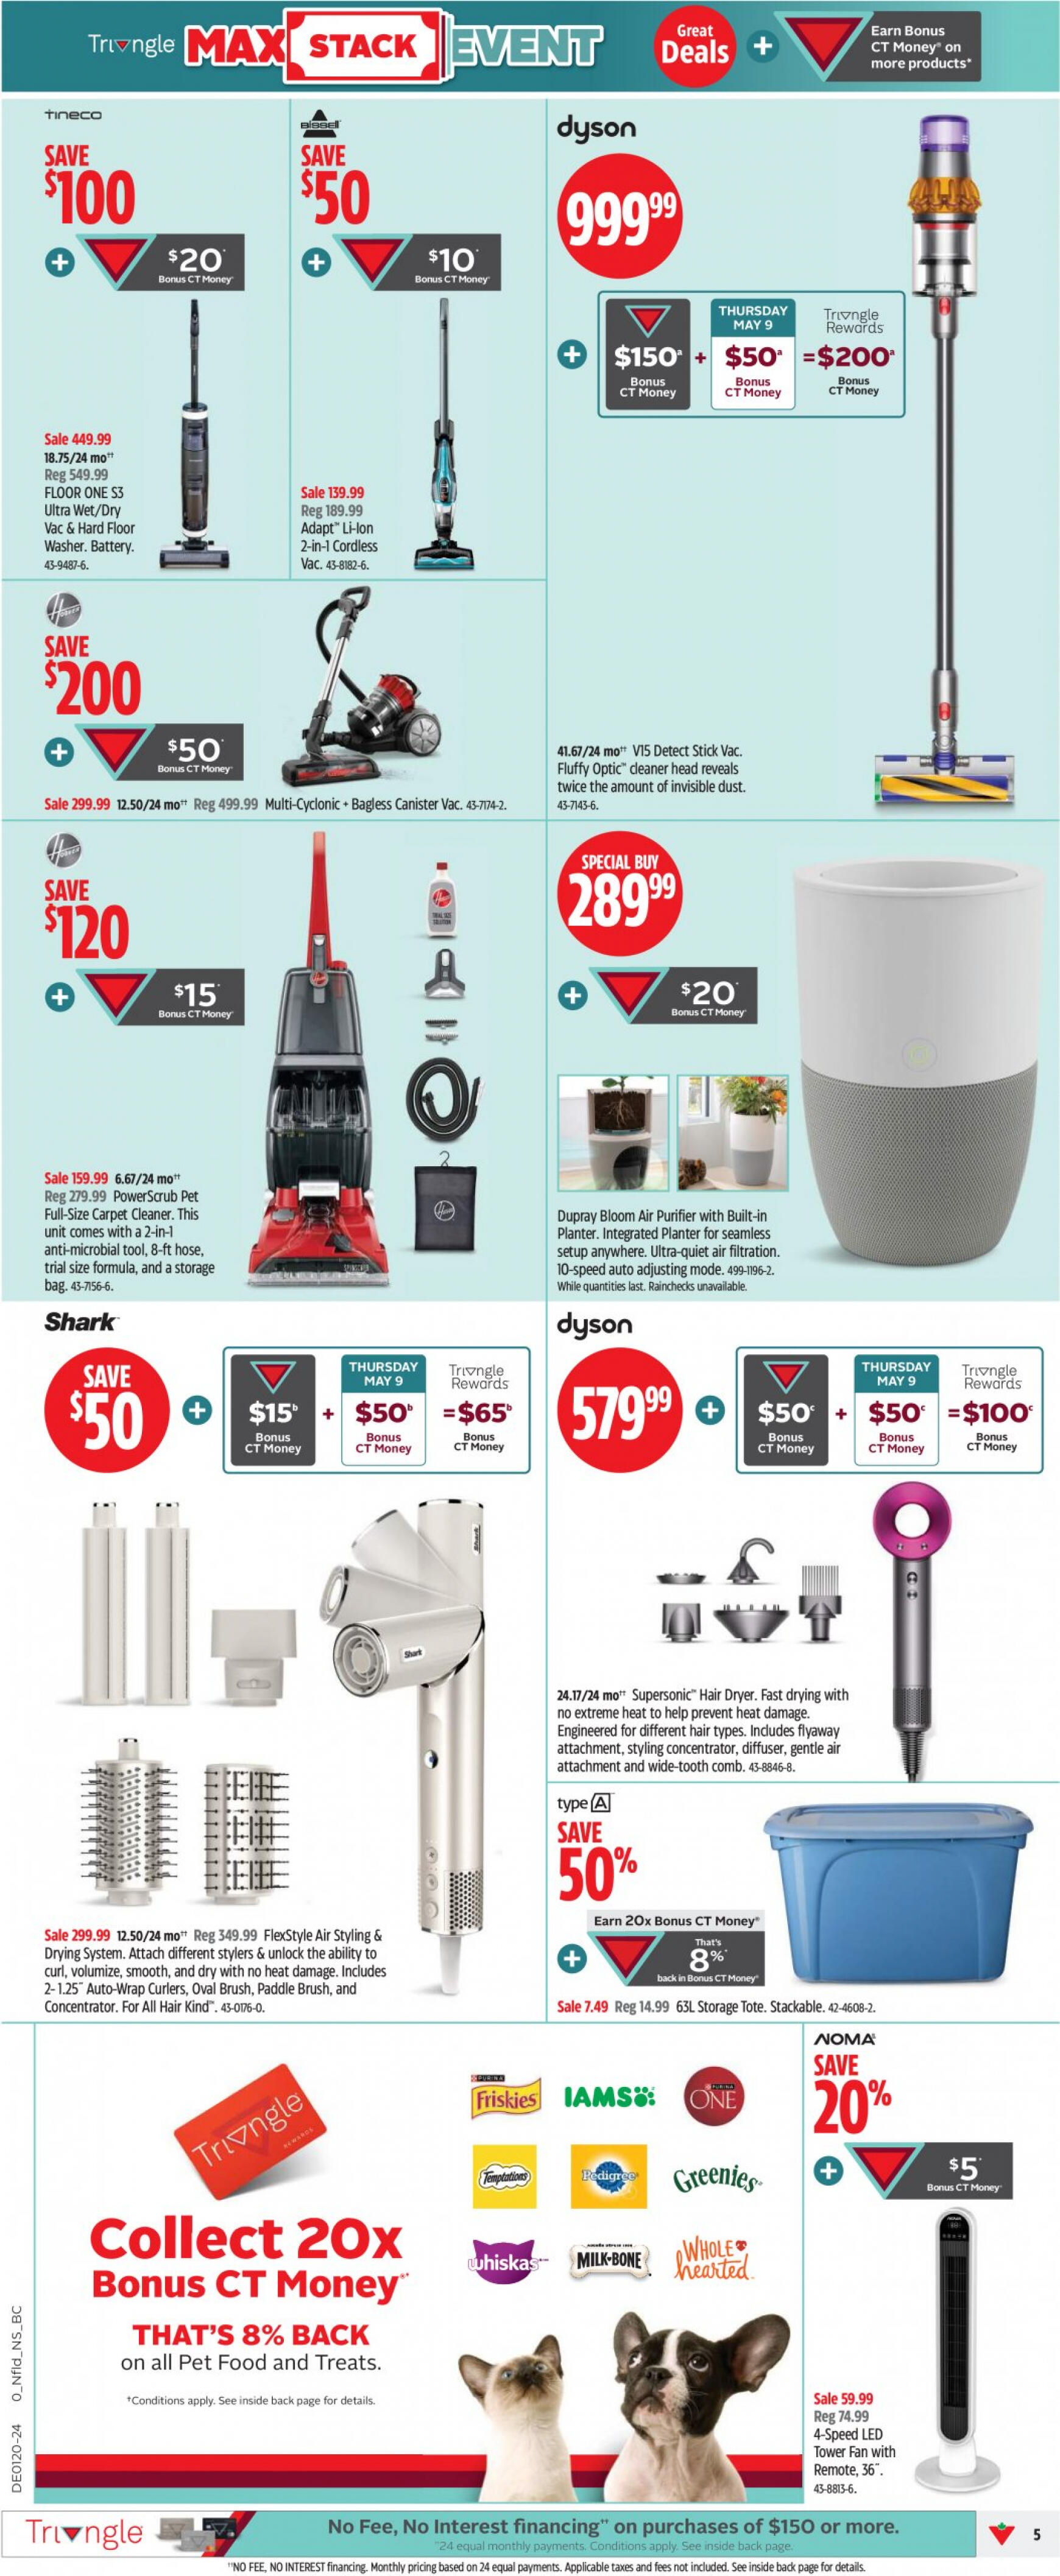 canadian-tire - Canadian Tire flyer current 09.05. - 15.05. - page: 5